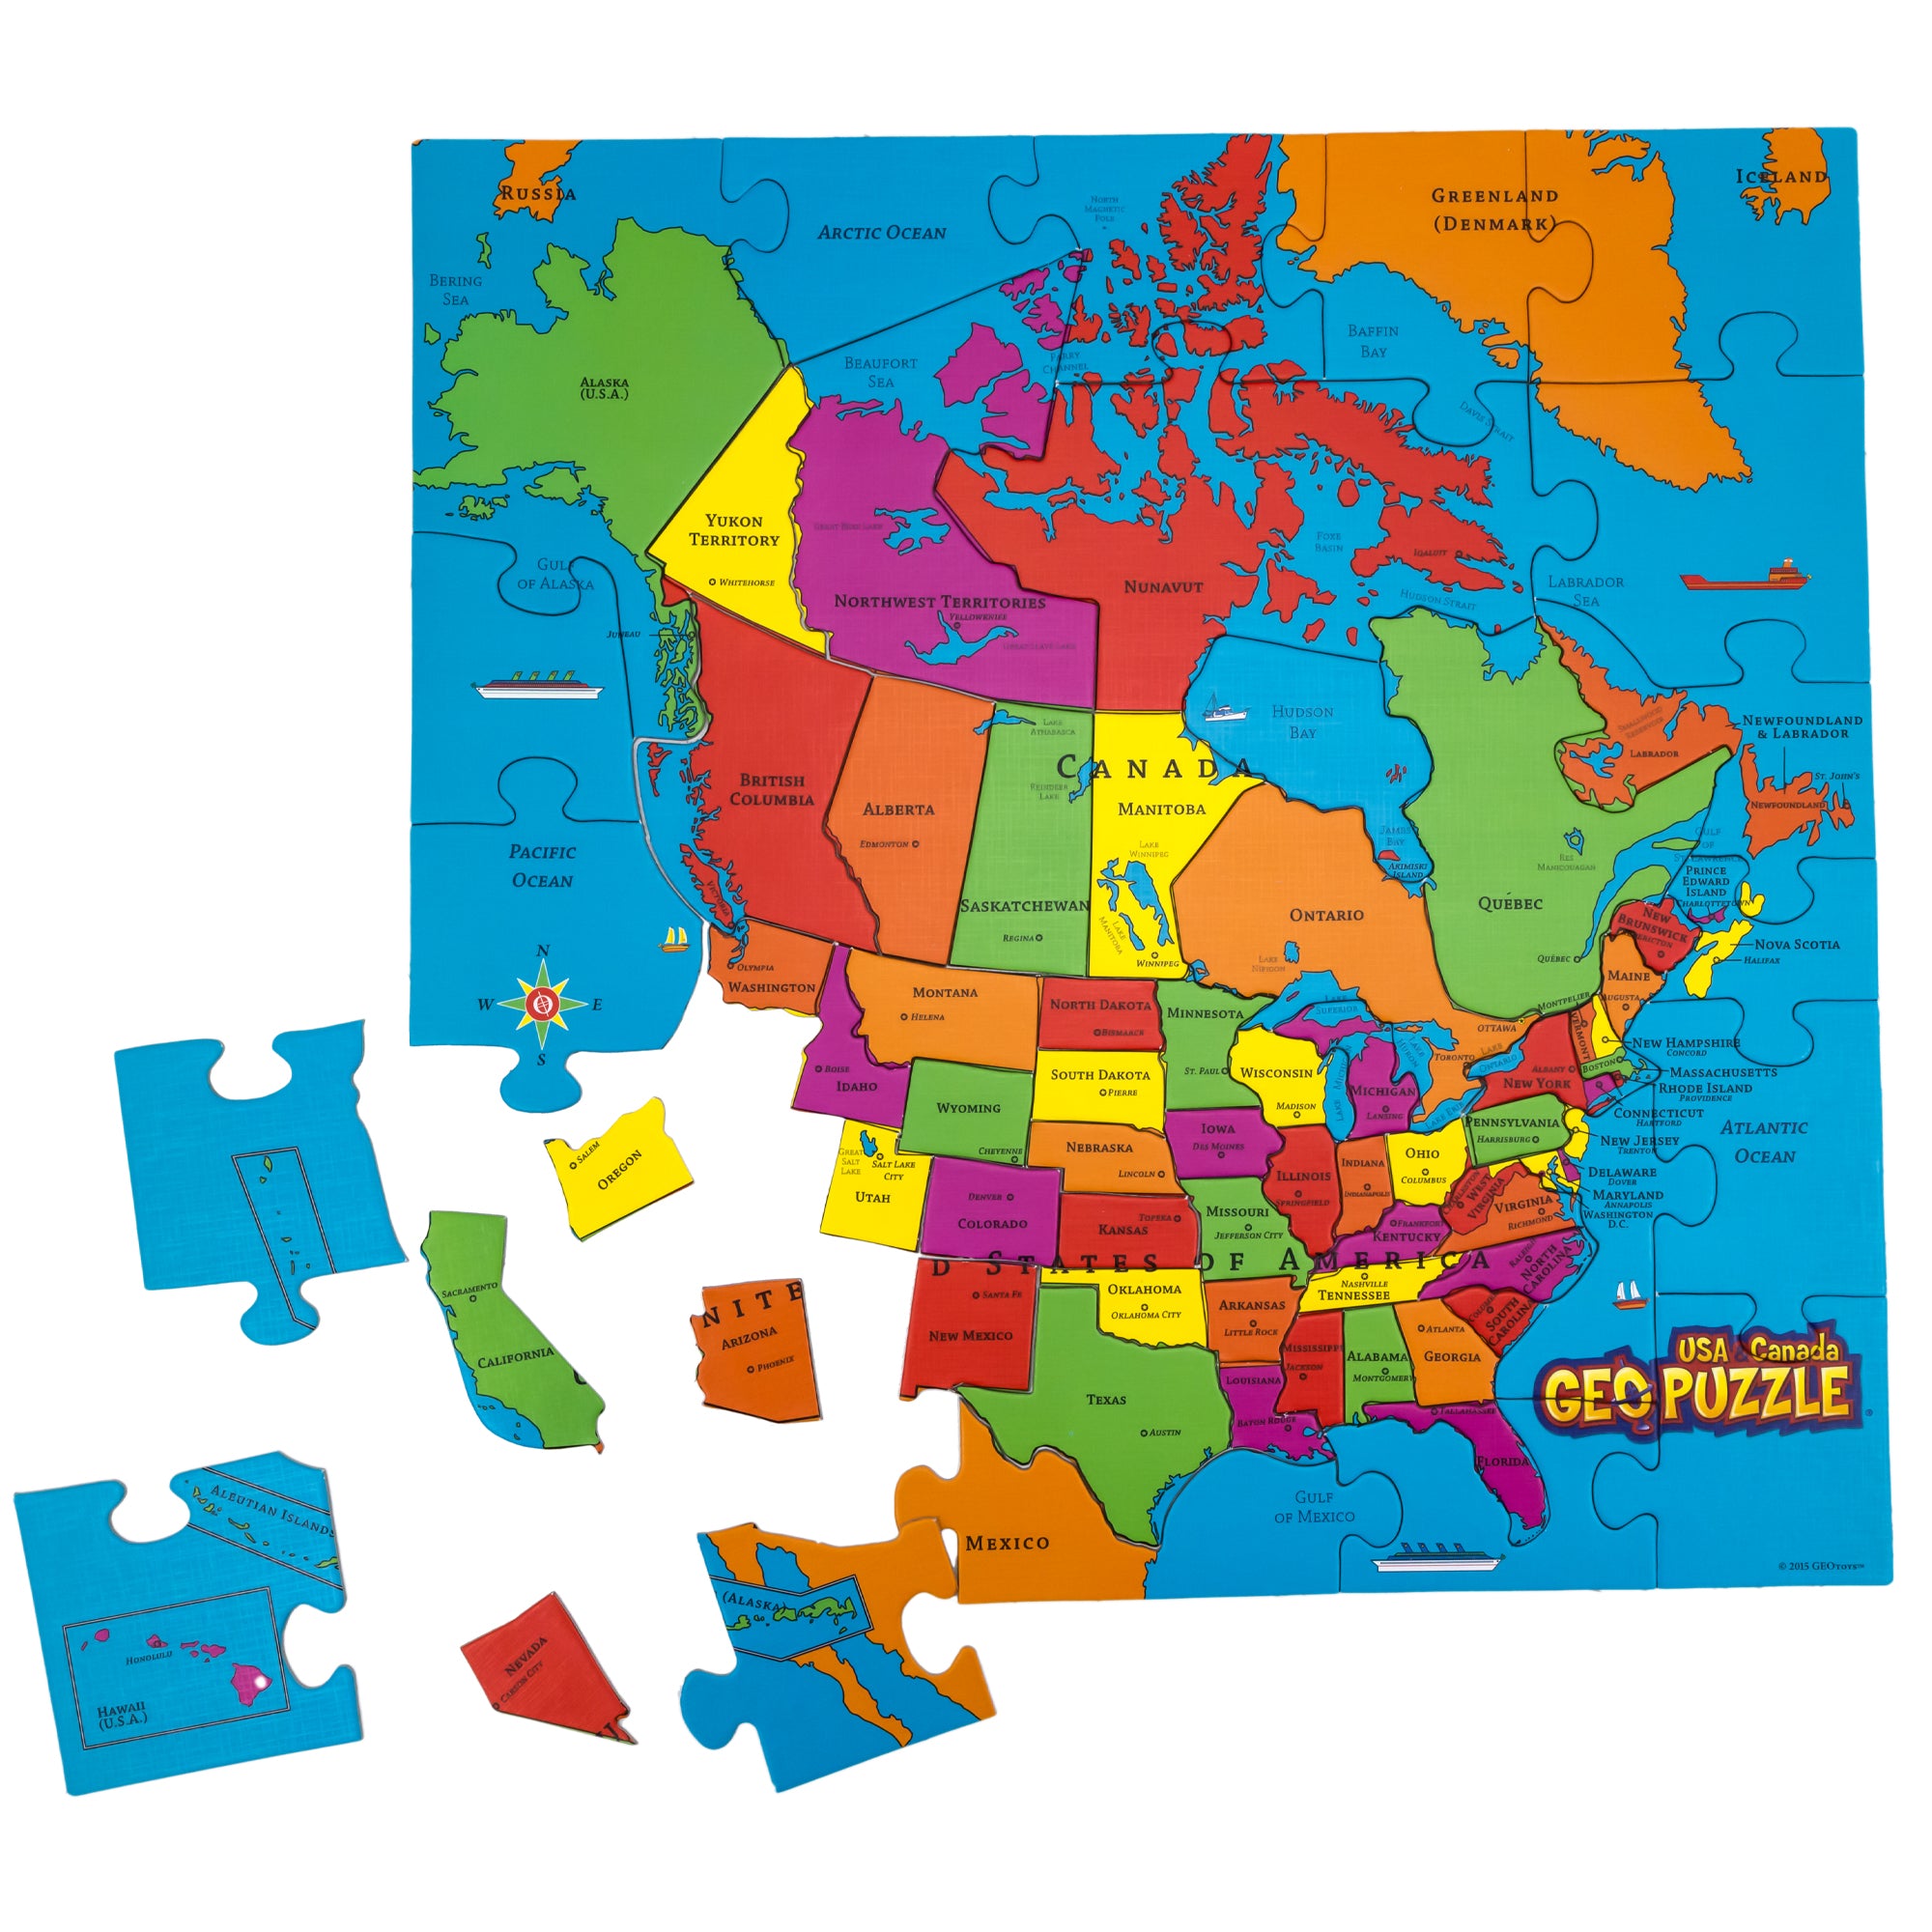 Geo Puzzle of U S A and Canada. The puzzle is mostly put together with 7 pieces in the bottom-left corner spread out. The ocean is blue and each country is its own piece. Each country is a different color. The colors are red, orange, yellow, green, and pink. 